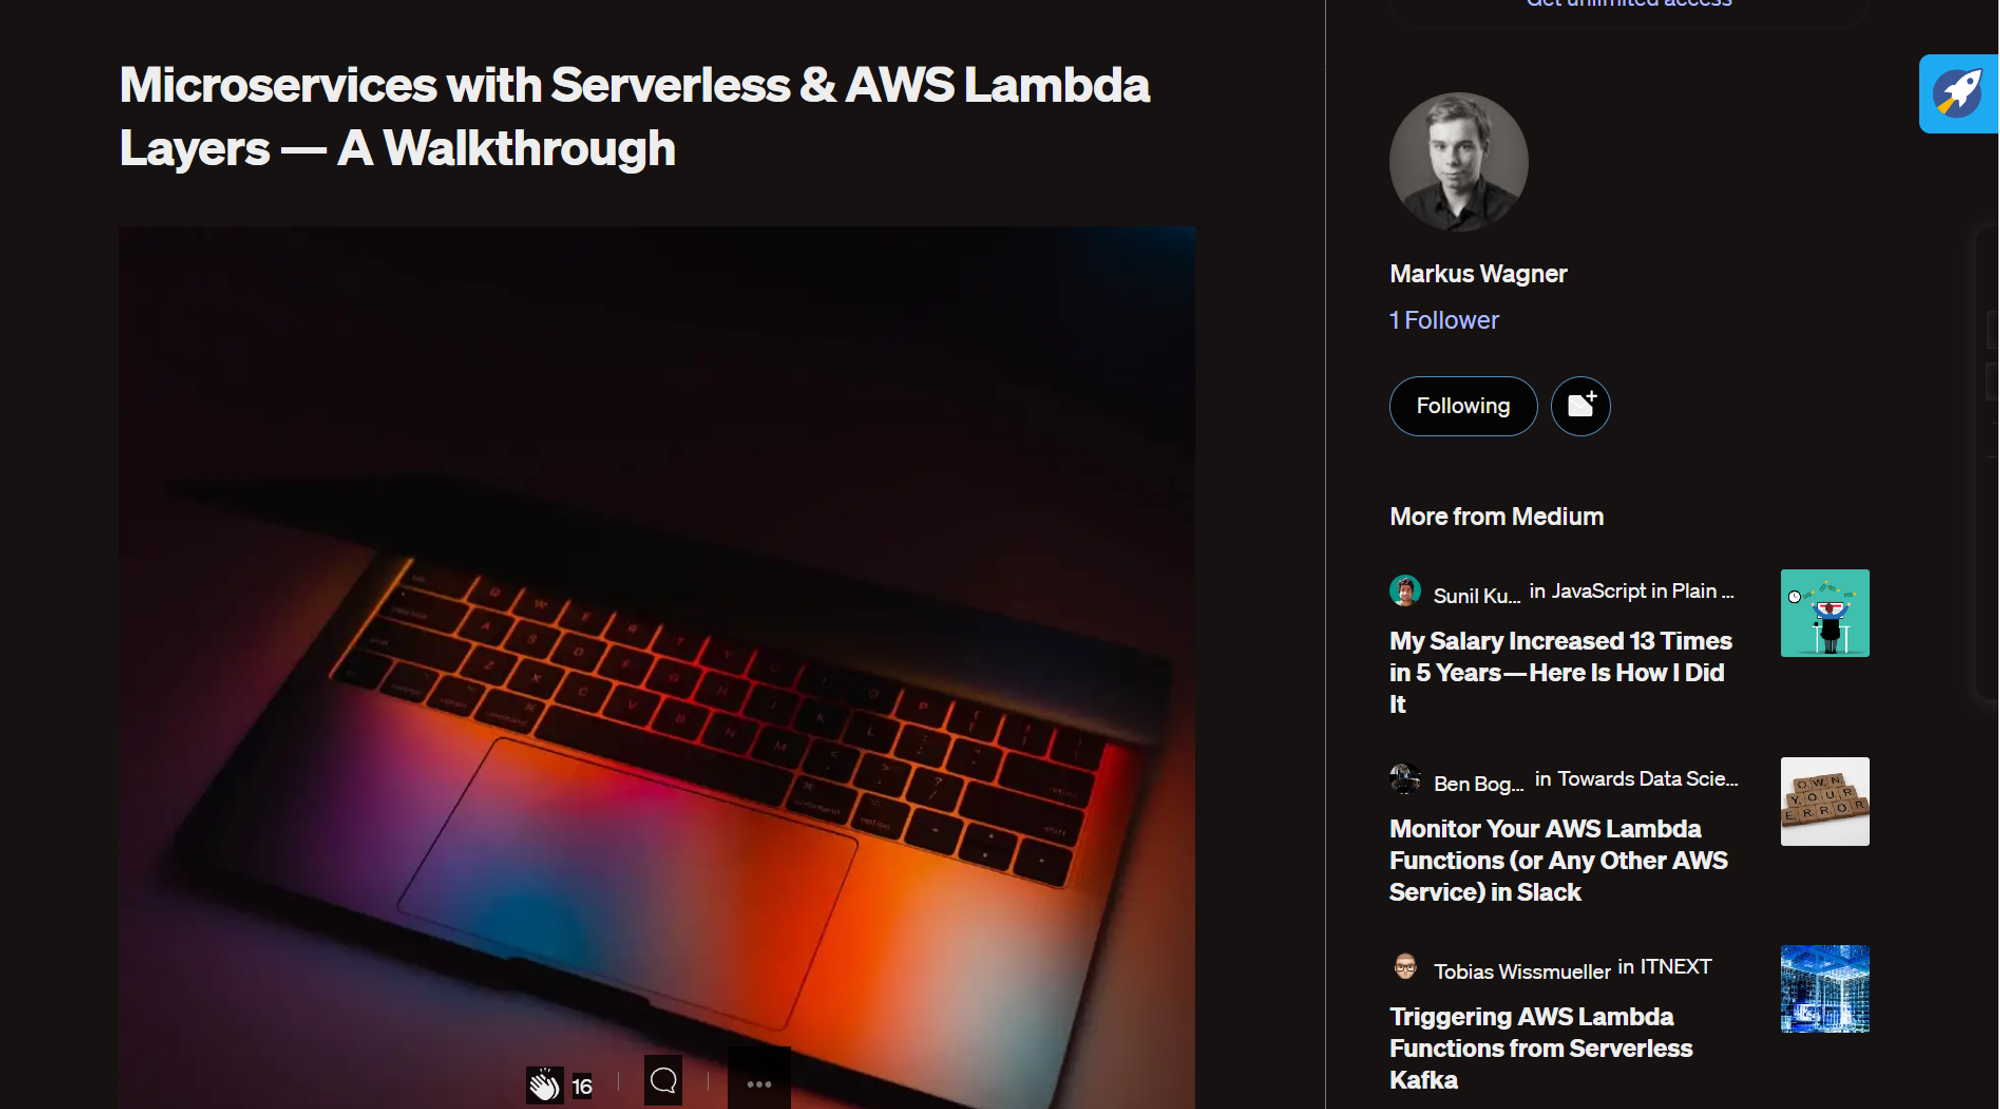 Medium Article about Microservices with AWS Lambda